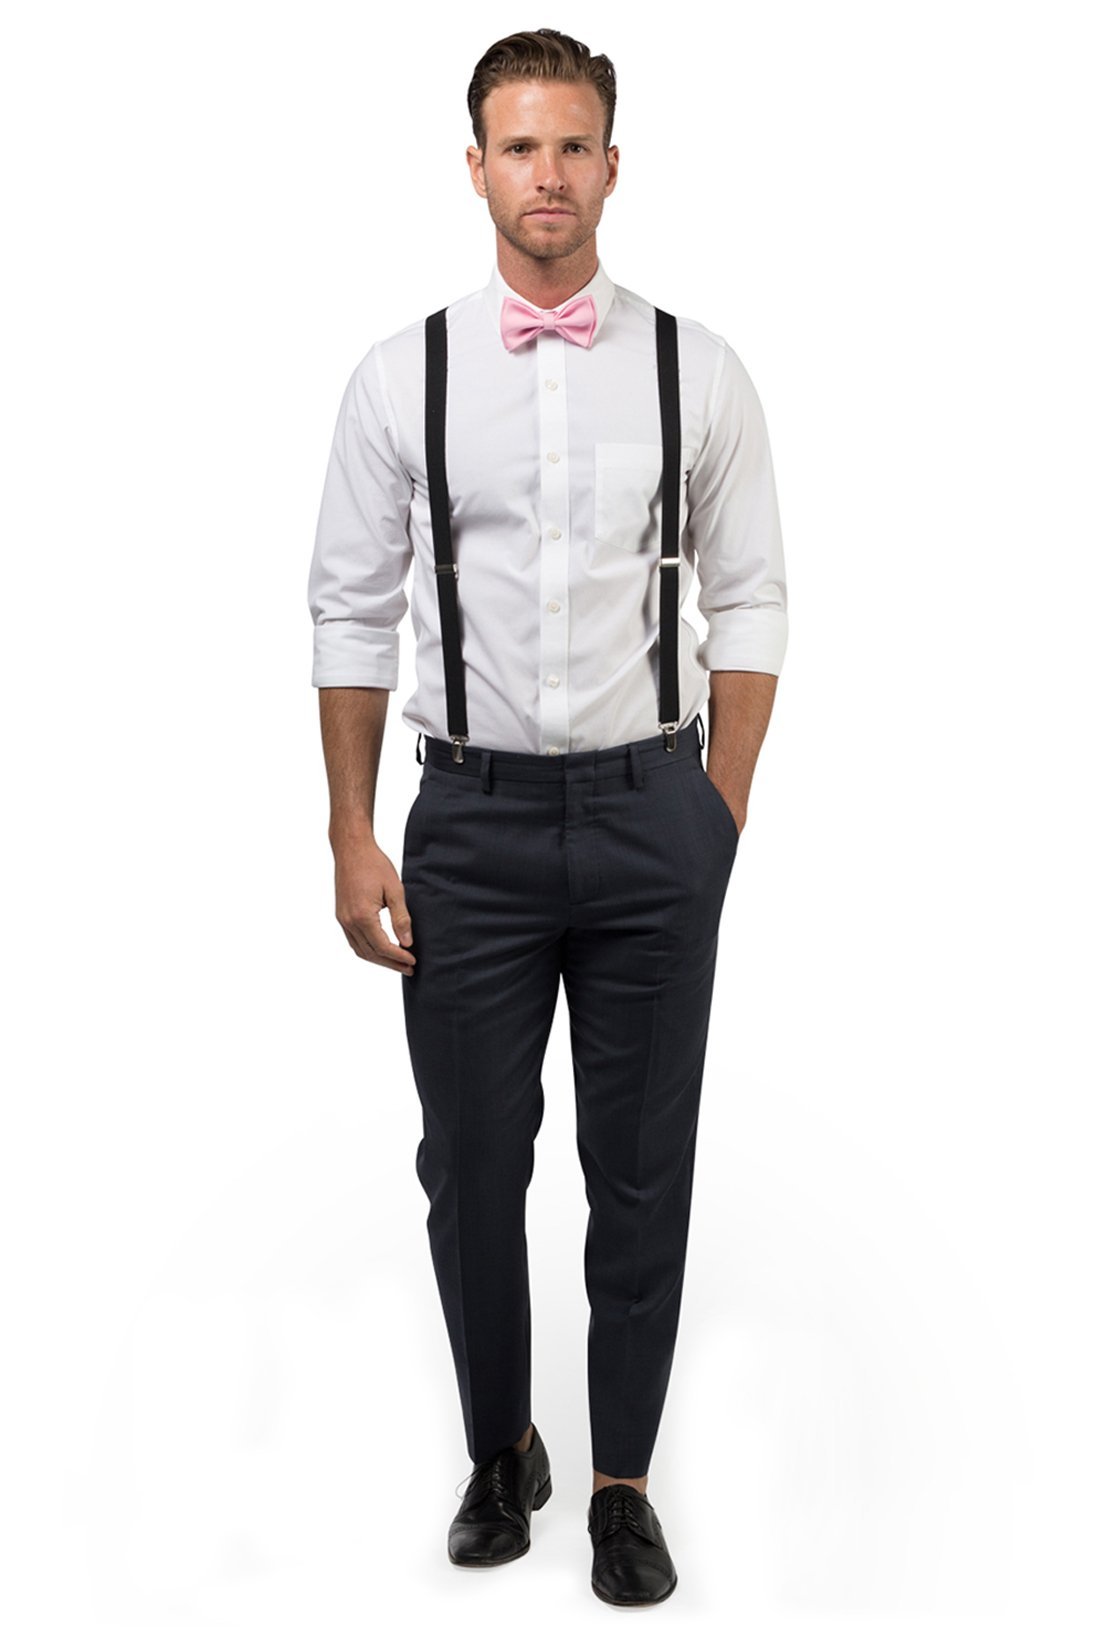 Black Suspenders & Candy Pink Bow Tie